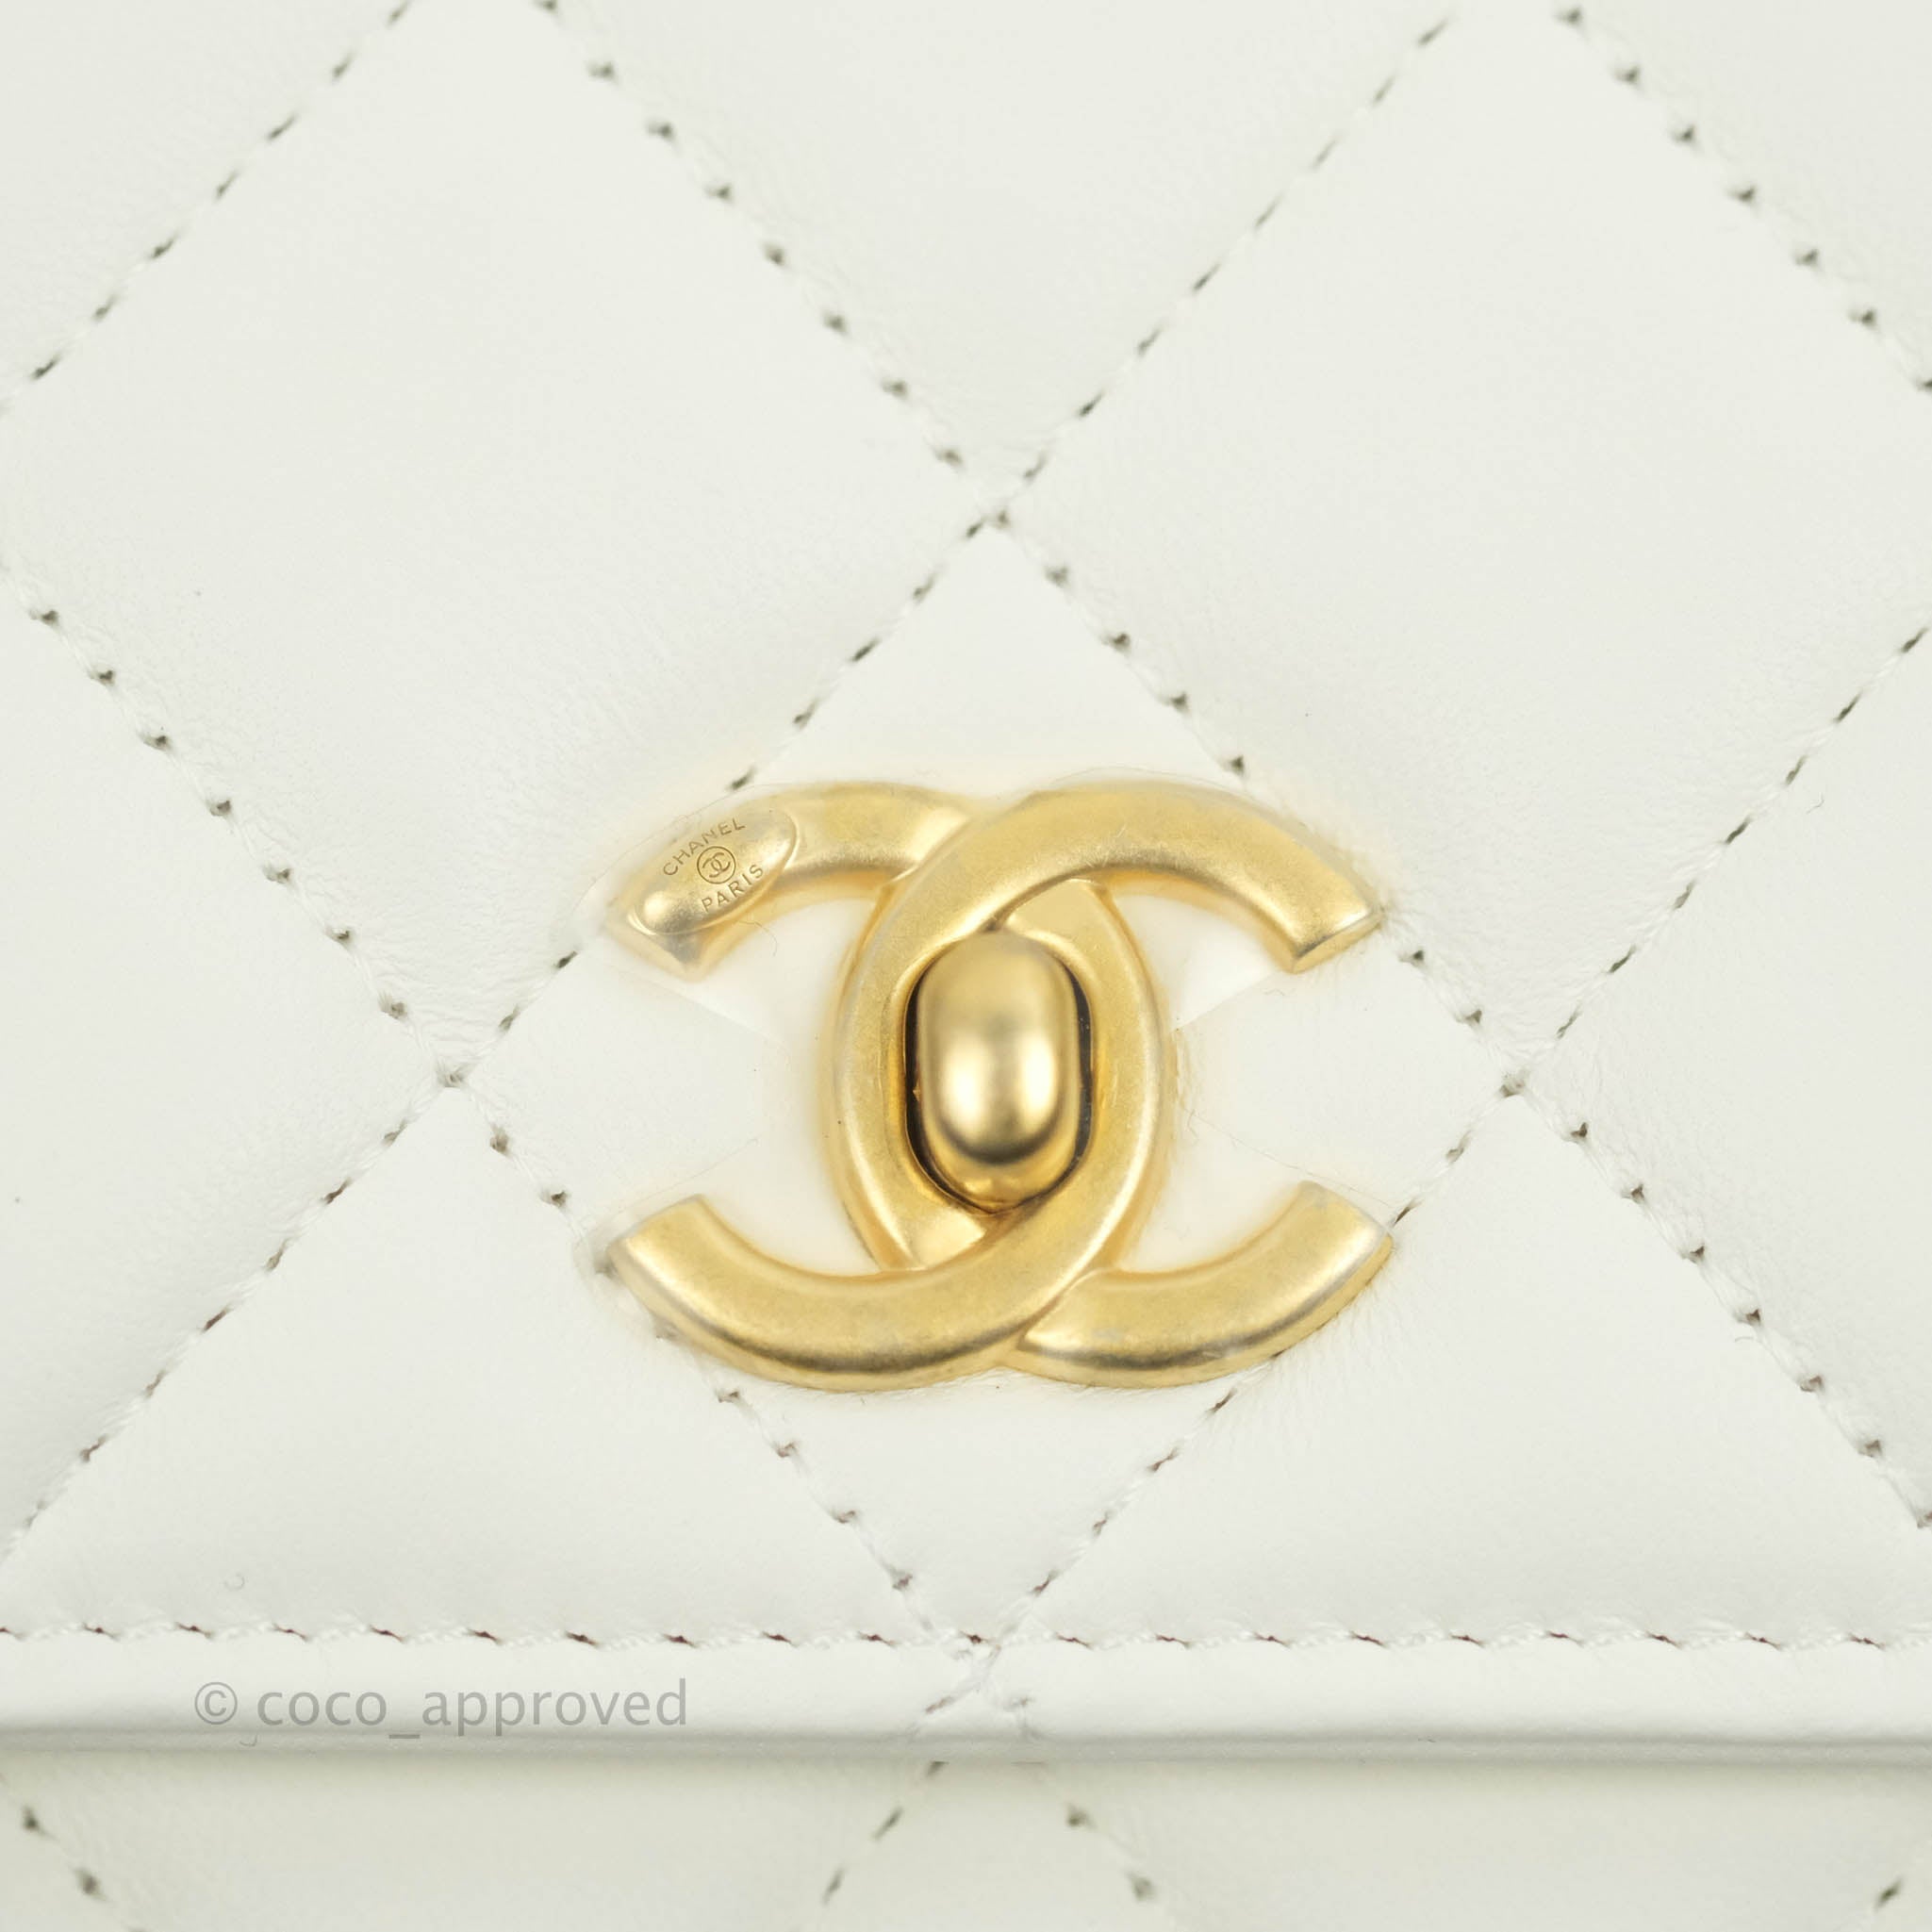 Chanel Quilted Pearl Crush Wallet on Chain WOC White Lambskin Aged Gold  Hardware